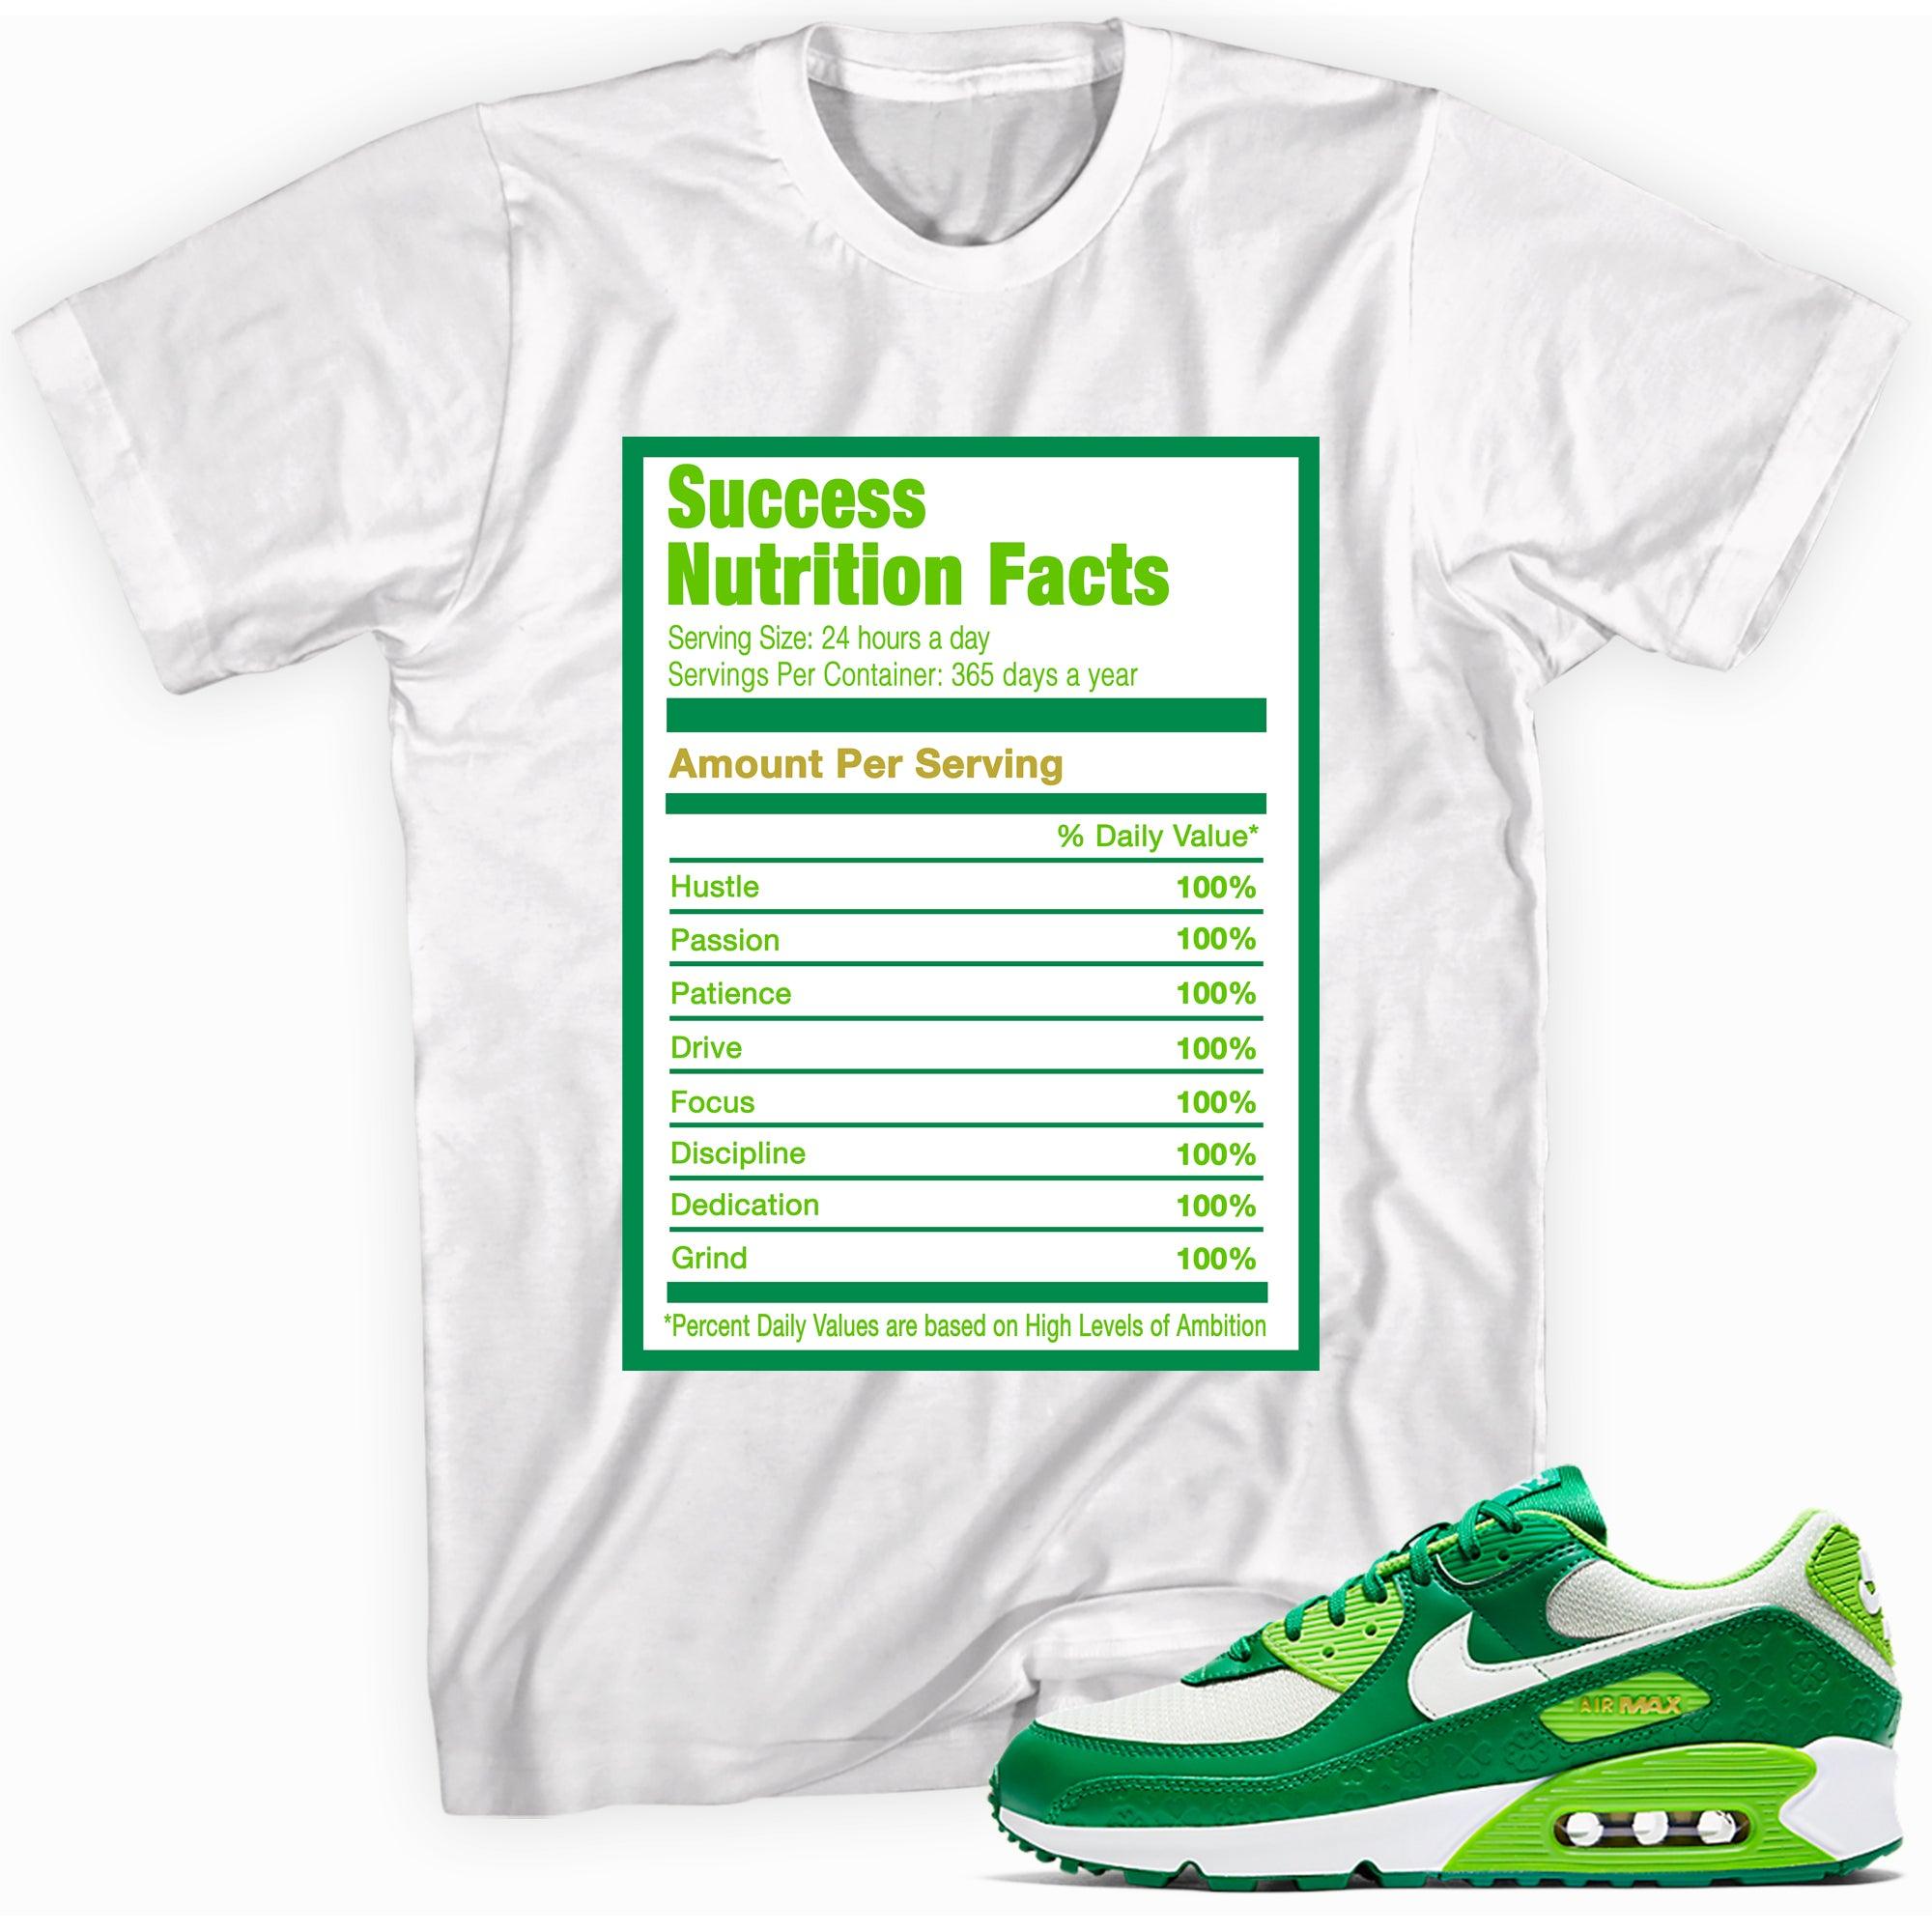 Success Nutrition Facts Nike Air Max 90 St Patricks Day photo